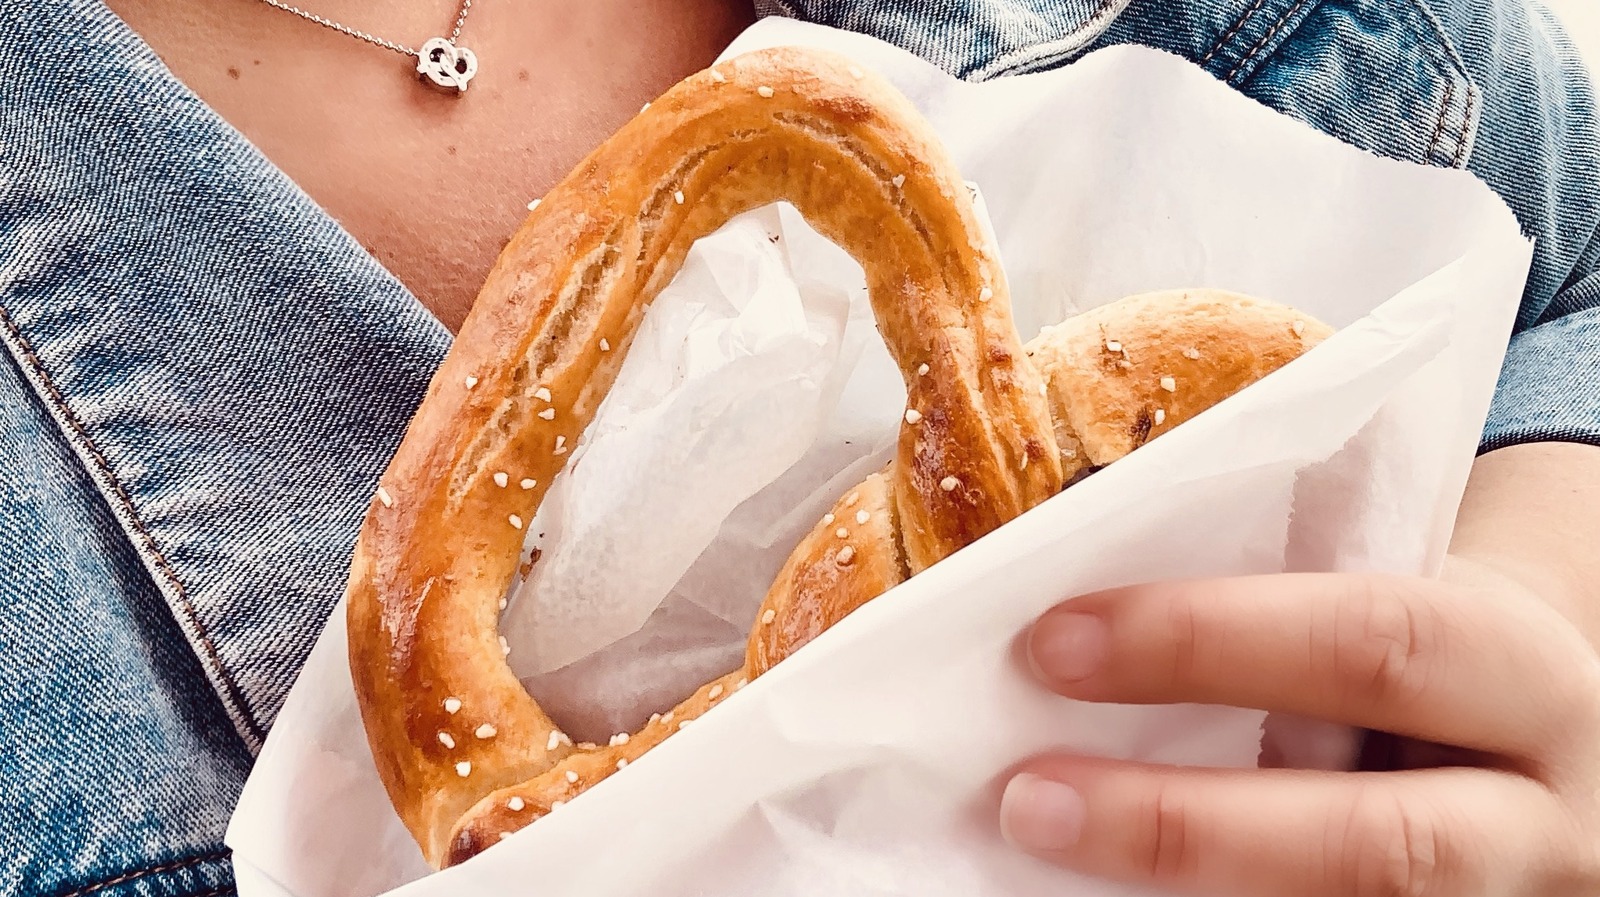 https://www.tastingtable.com/img/gallery/where-to-find-the-best-soft-pretzels-in-the-us/l-intro-1643654465.jpg